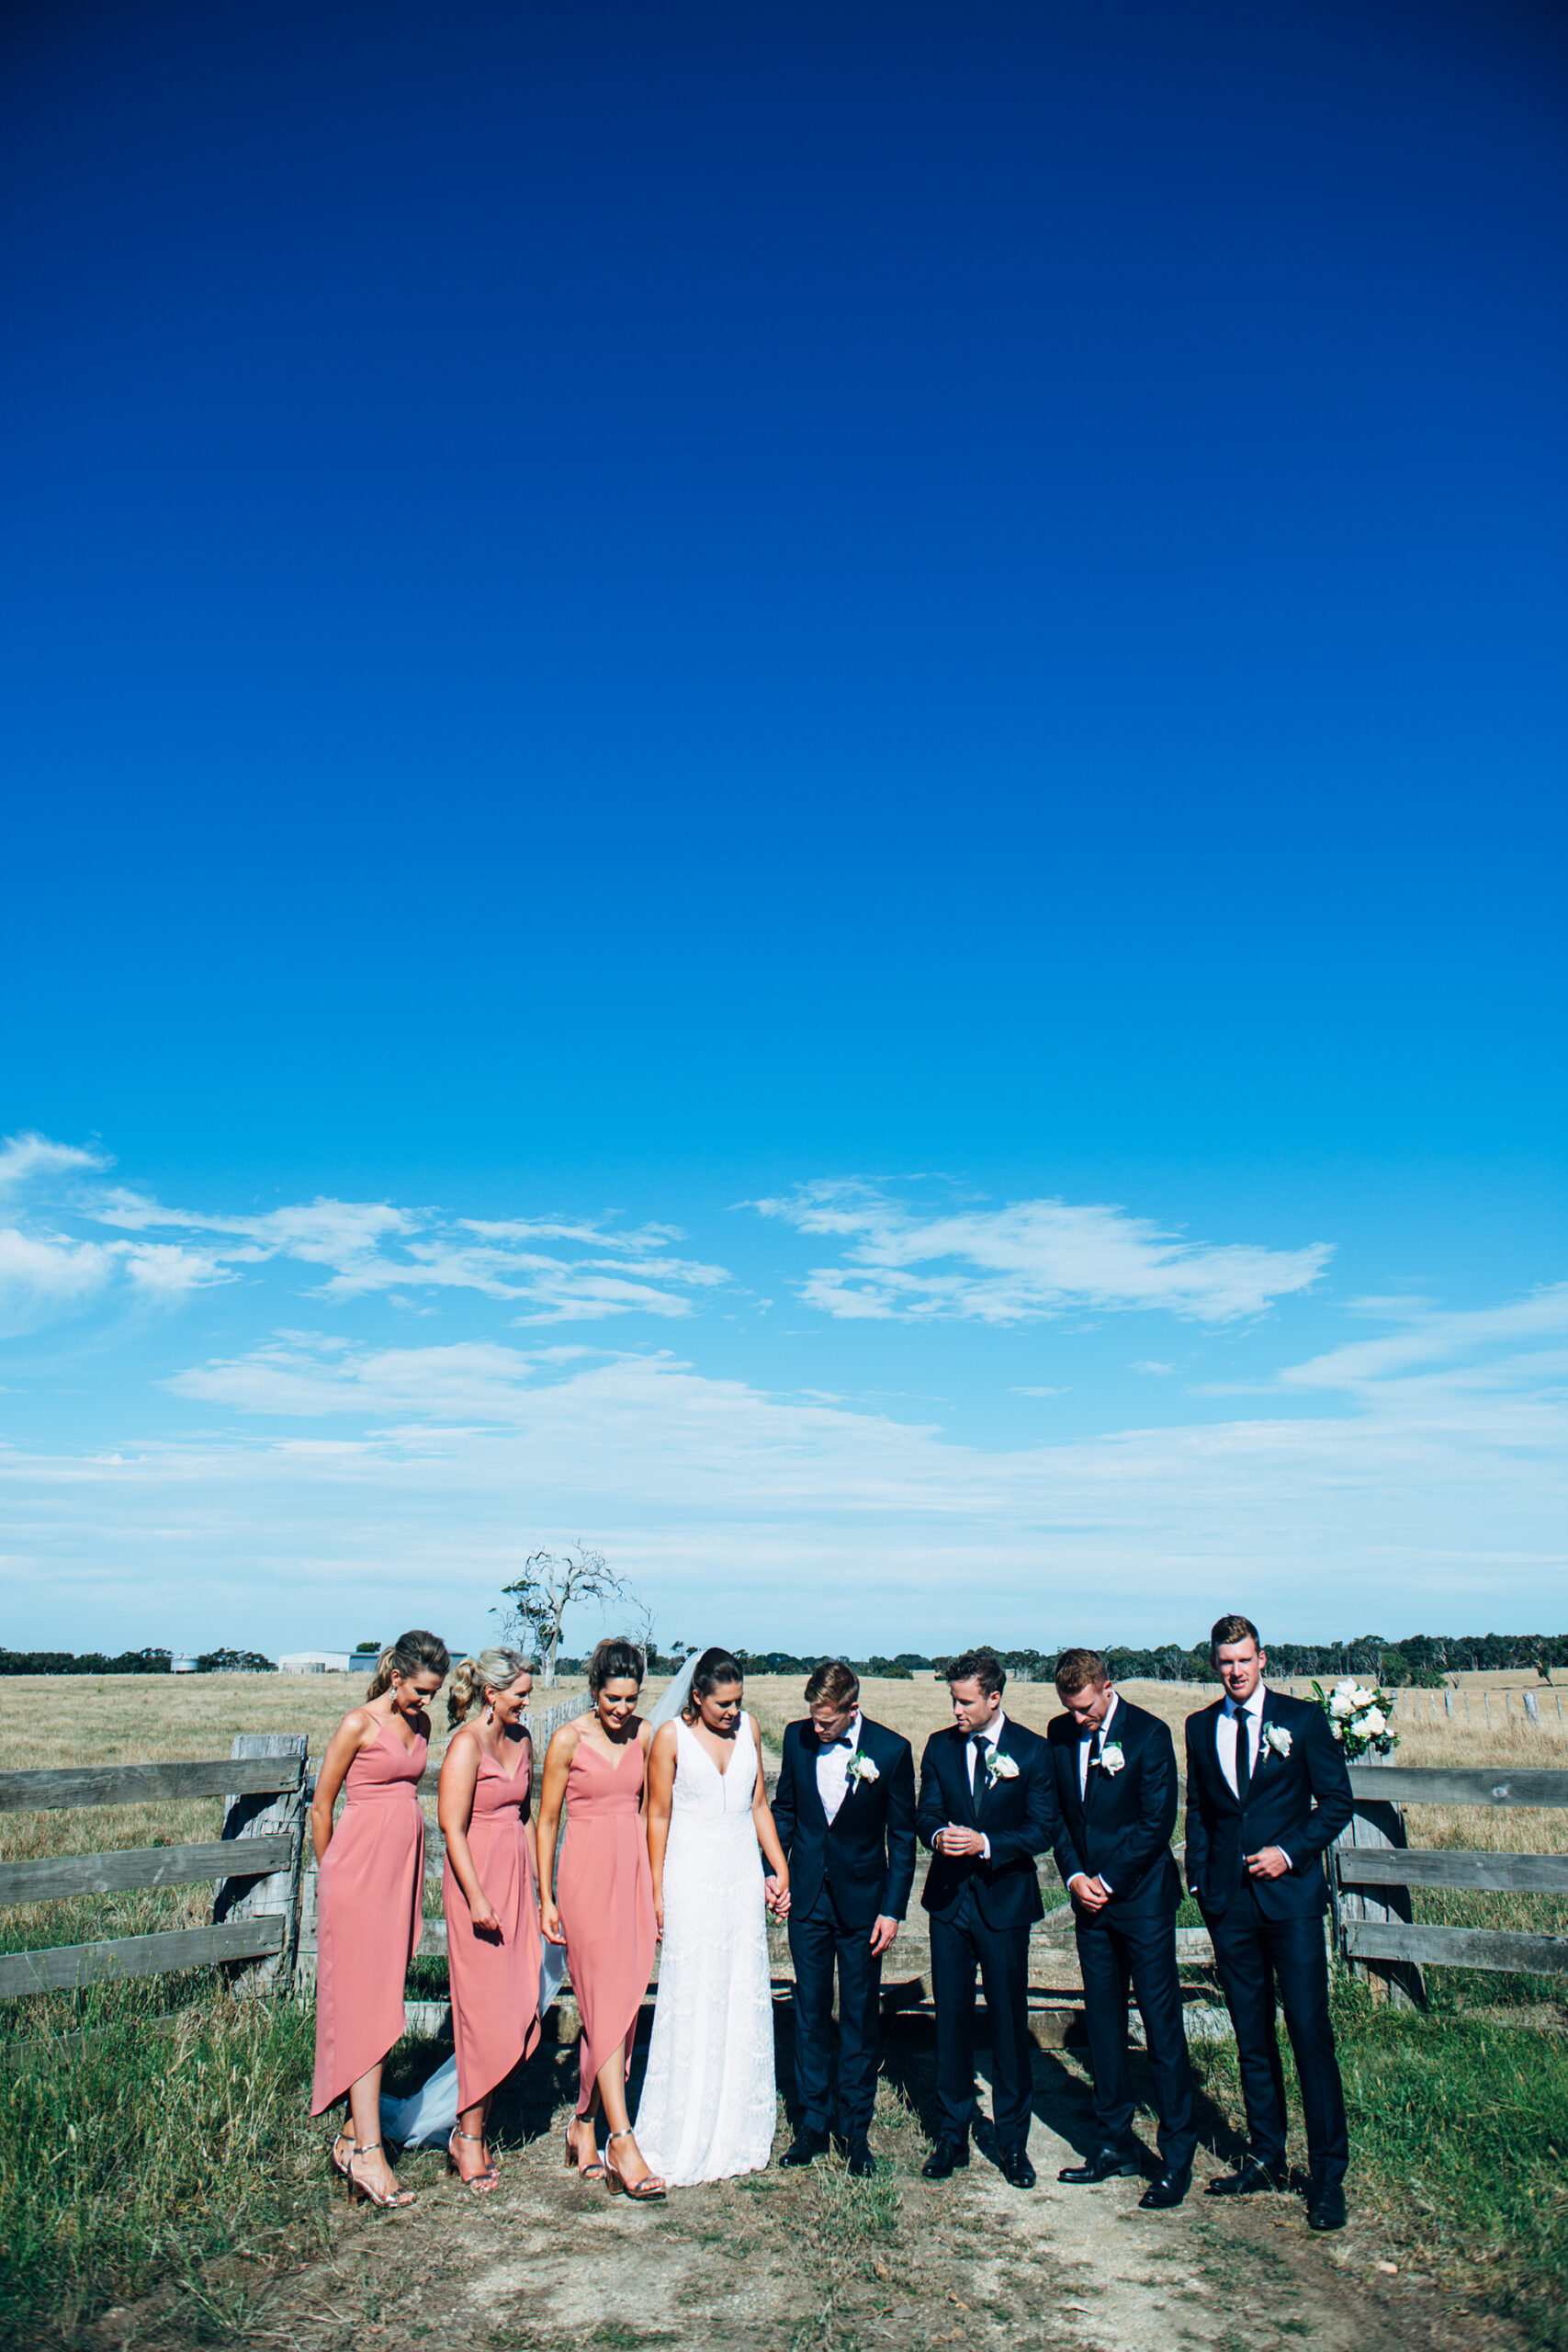 Danielle Seamus Elegant Rustic Wedding Love Other Photography SBS 020 scaled